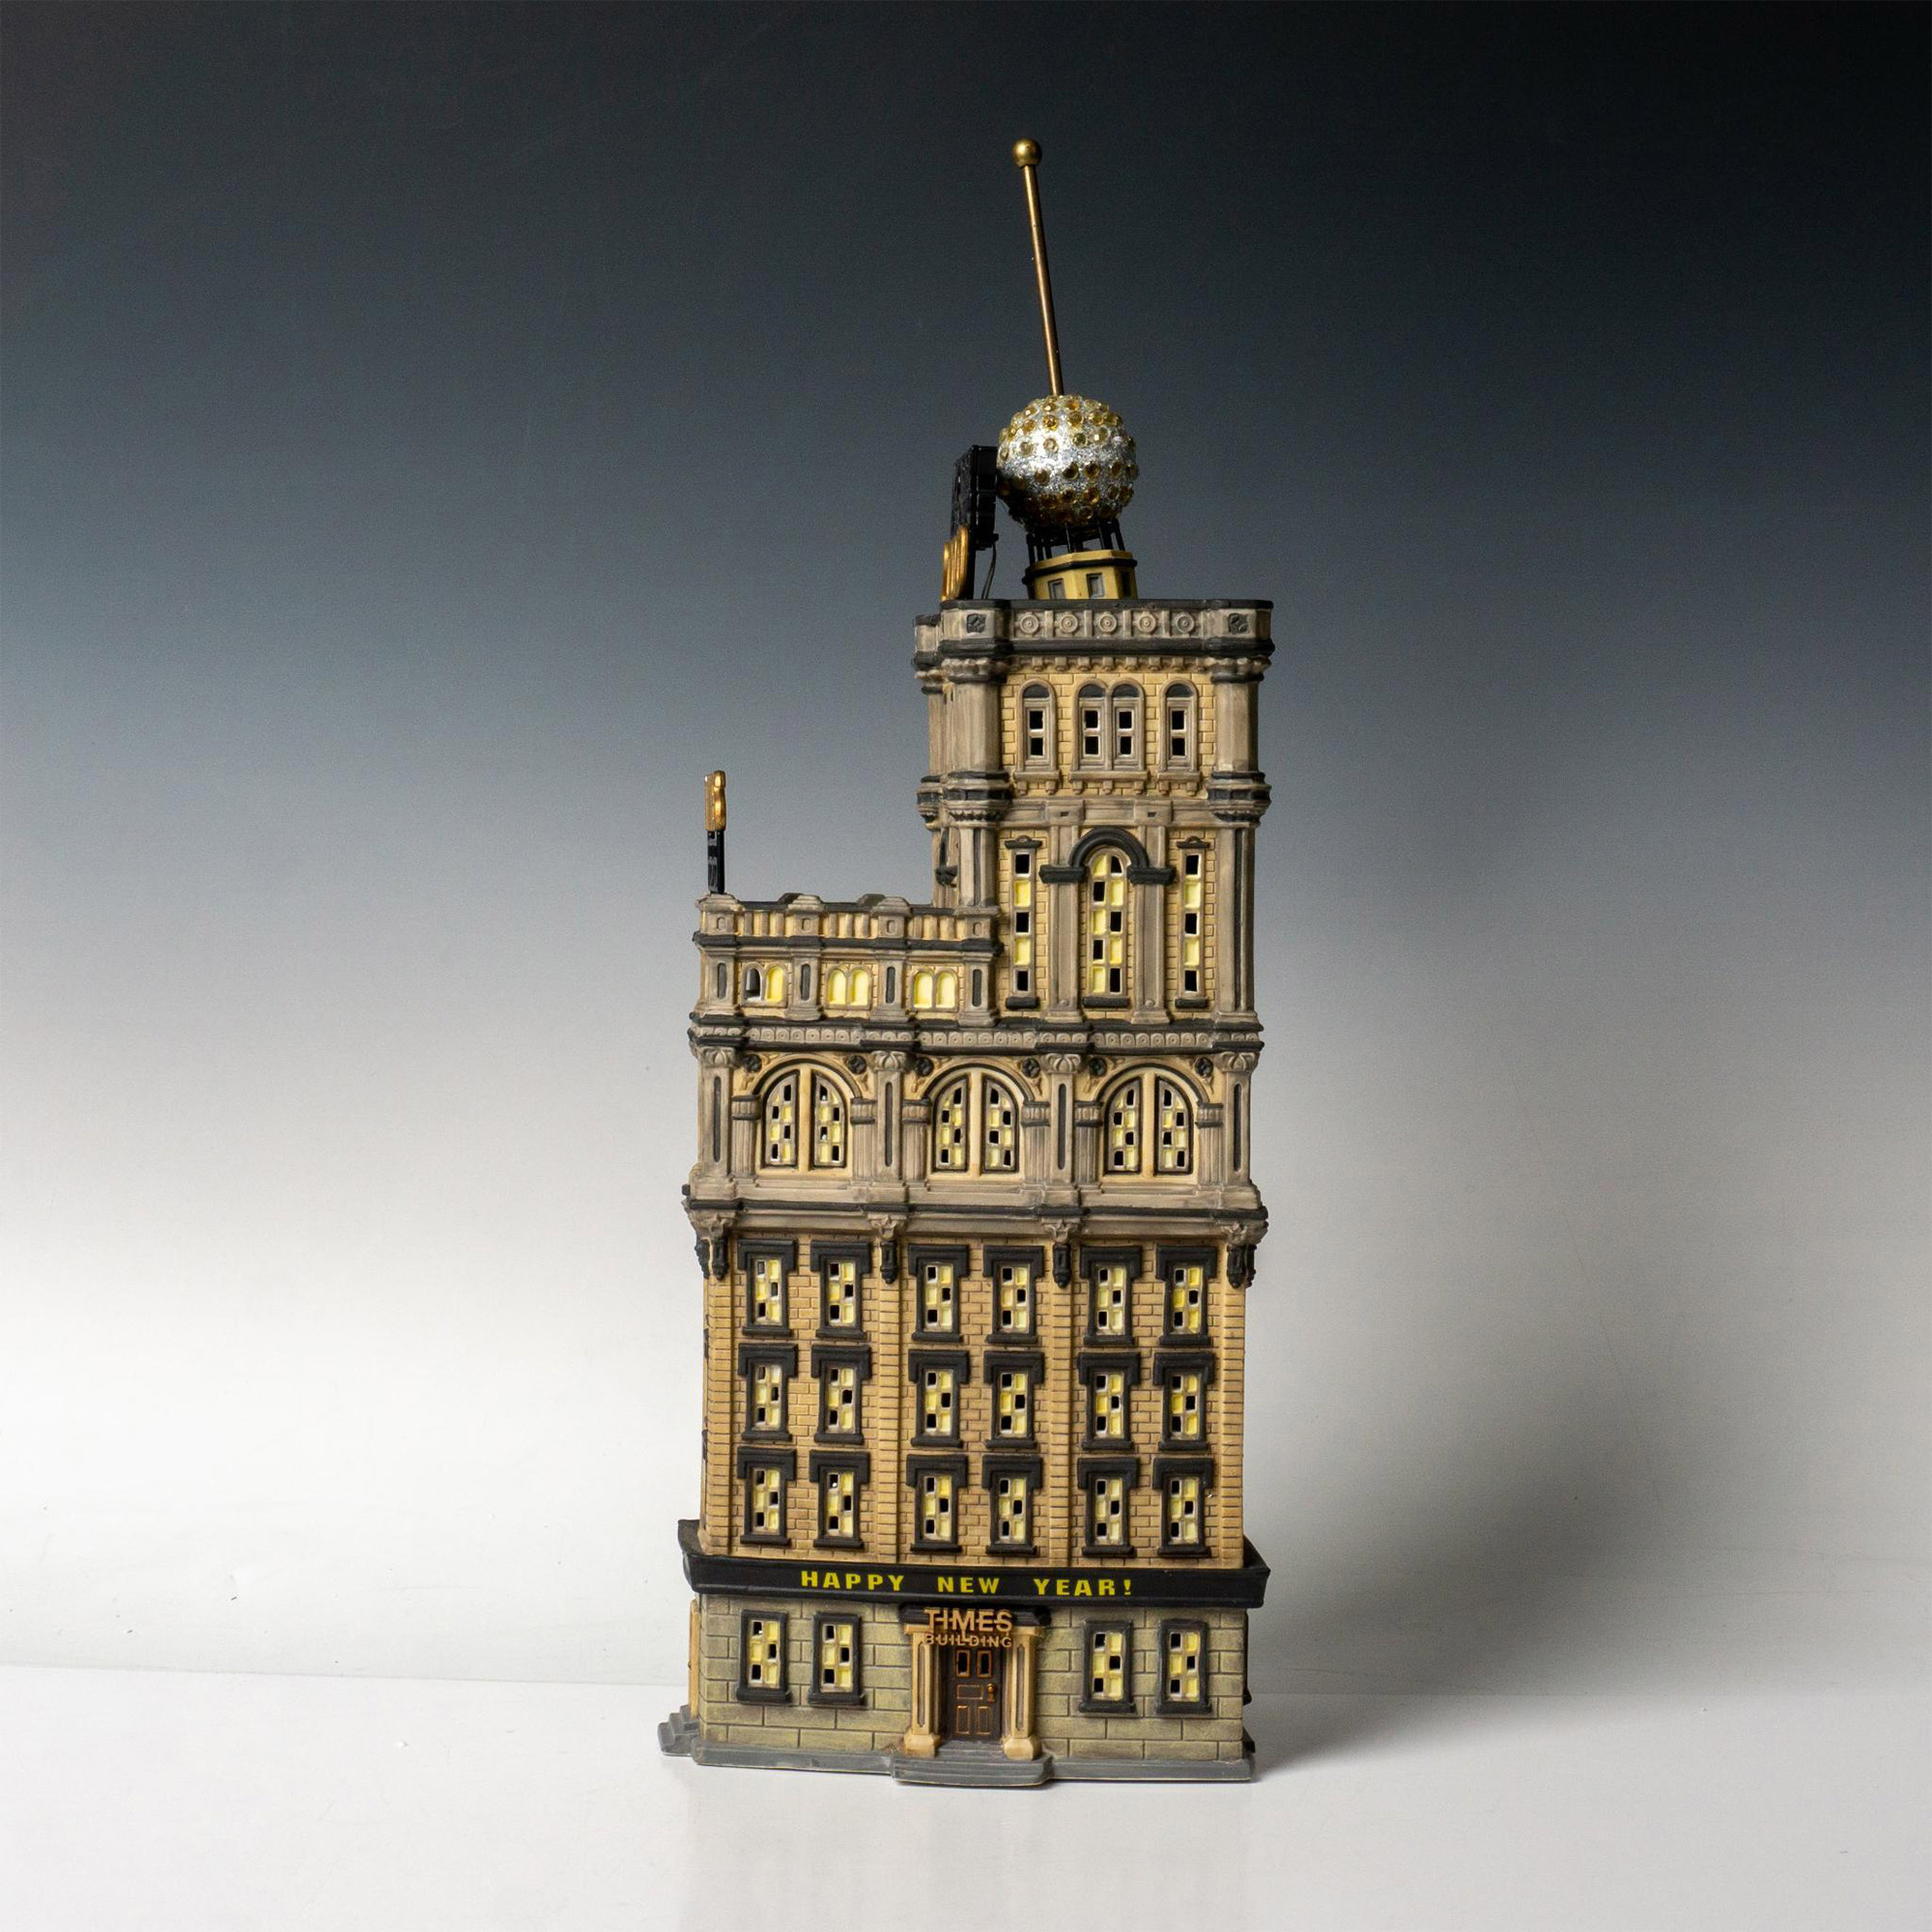 Department 56 Lighted Figurine, The Times Tower - Image 4 of 7